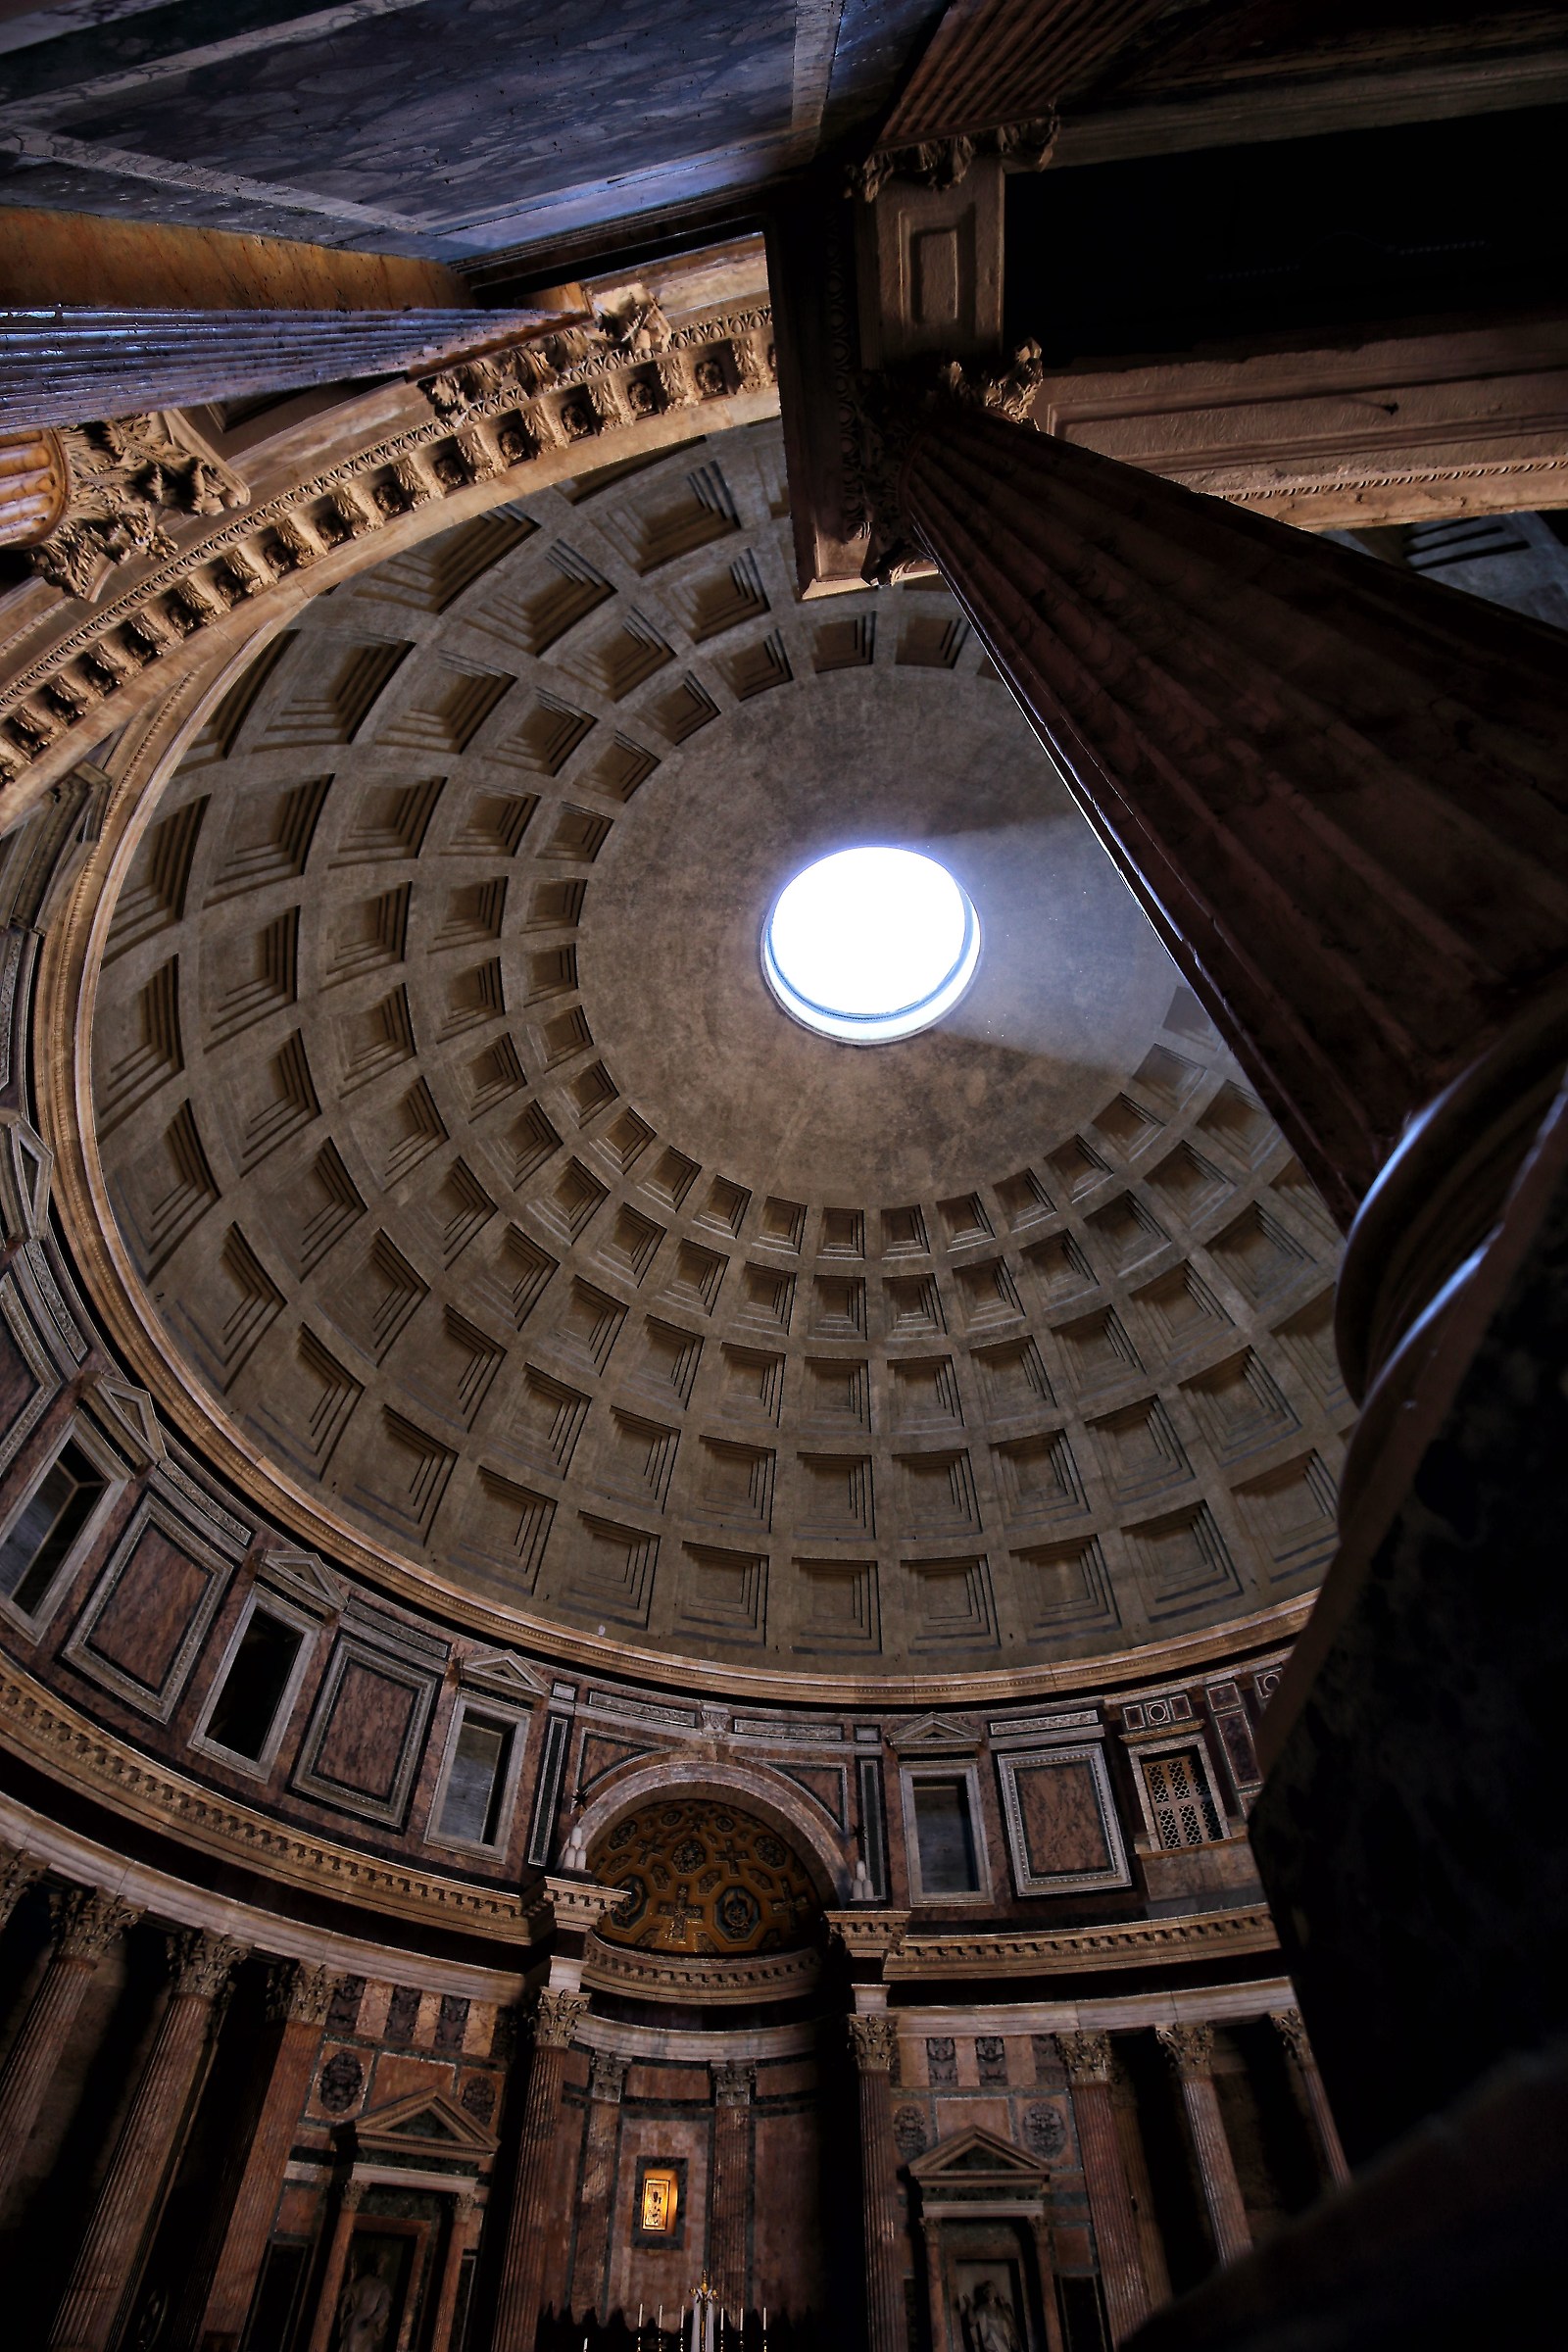 The Pantheon Dome...